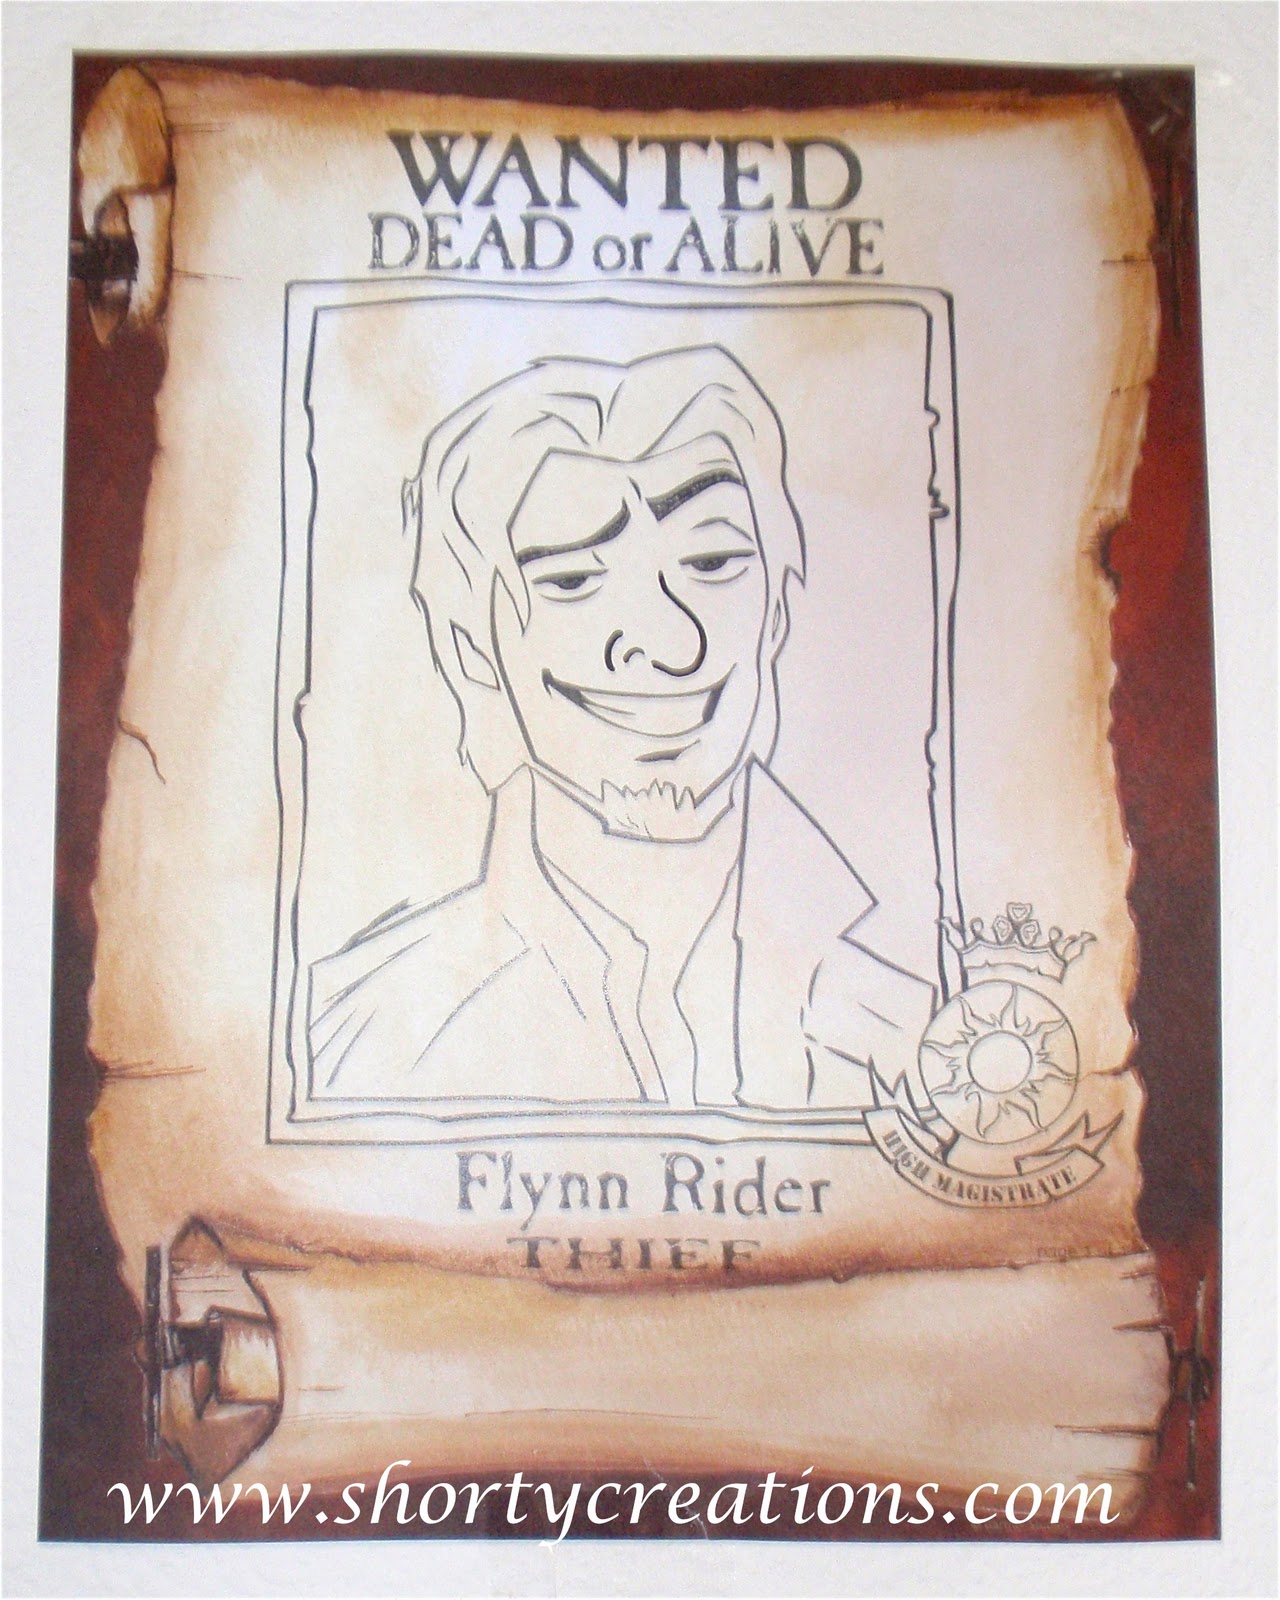 Flynn Rider is really mad that his nose is drawn wrong in every wanted post...